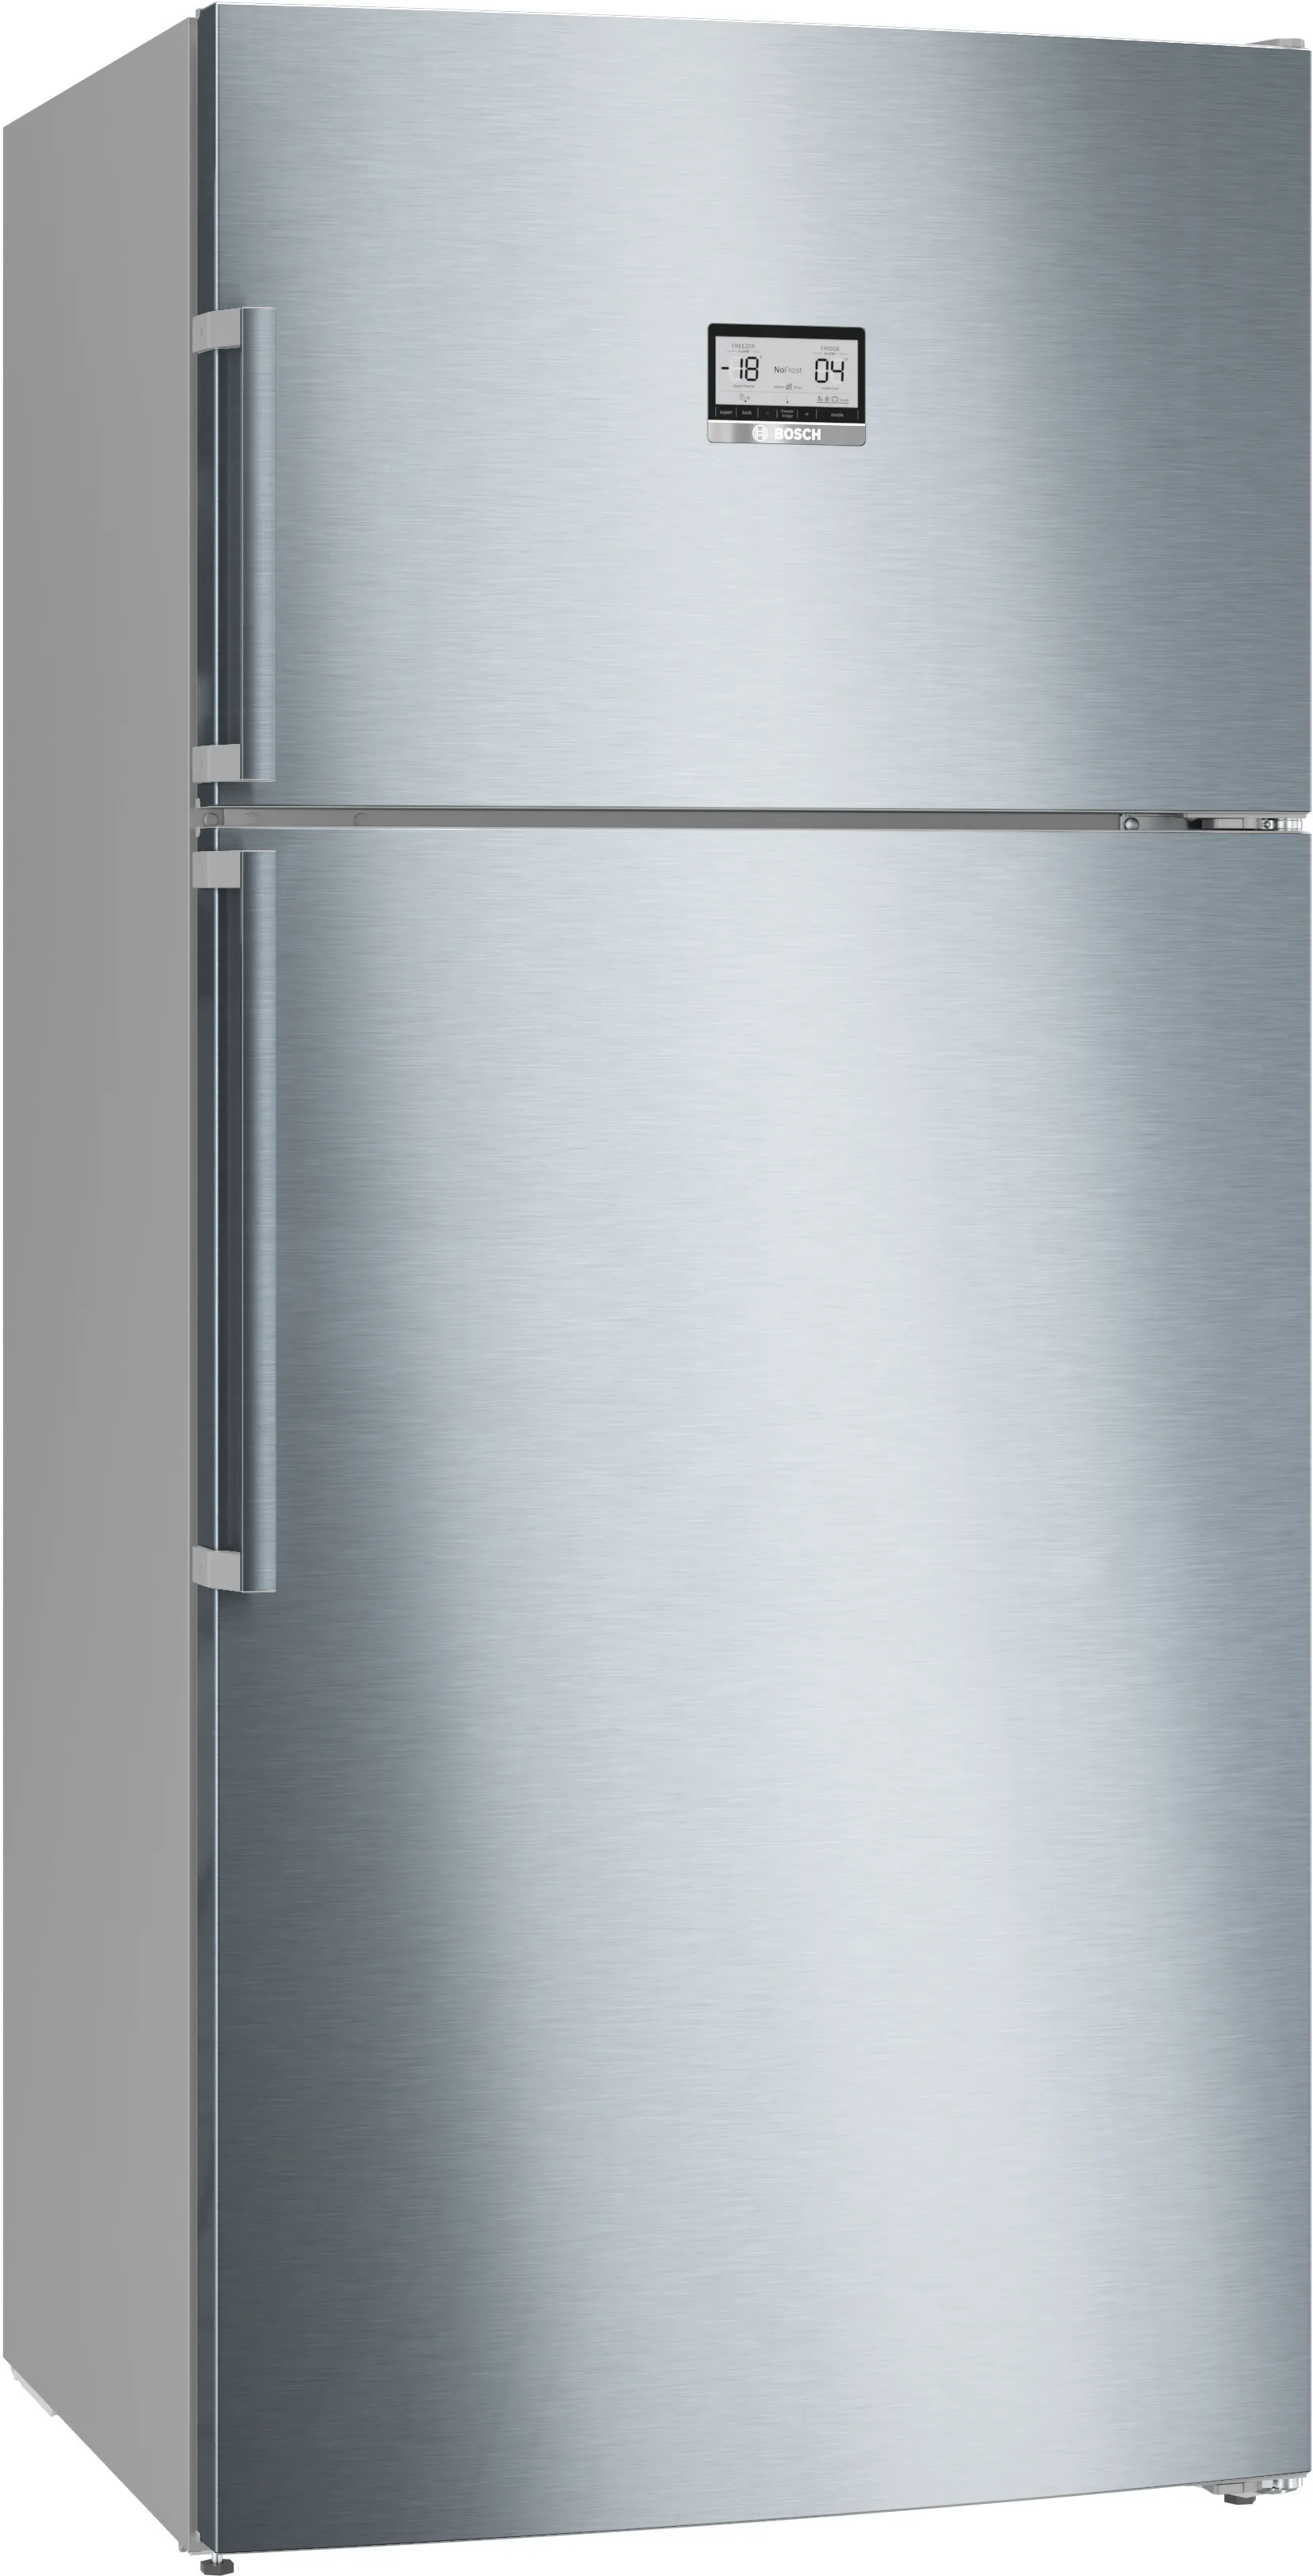 Series 6 Free-standing fridge-freezer with freezer at top 186 x 86 cm Stainless steel (with anti-fingerprint) 